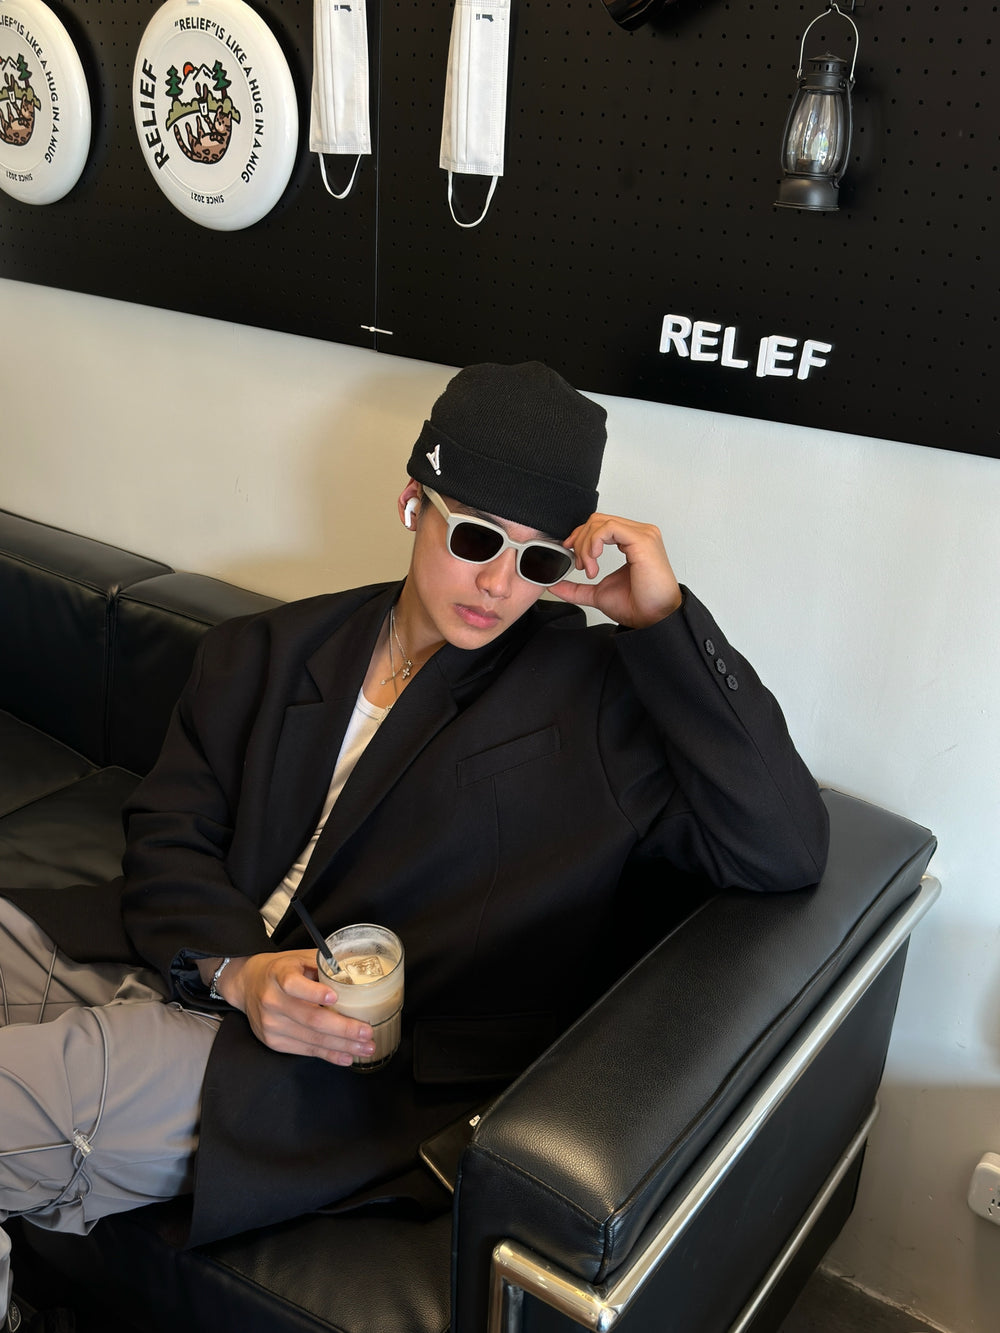 A person in a black jacket and hat, enjoying a seat on a couch wearing his luxury sunglasses.